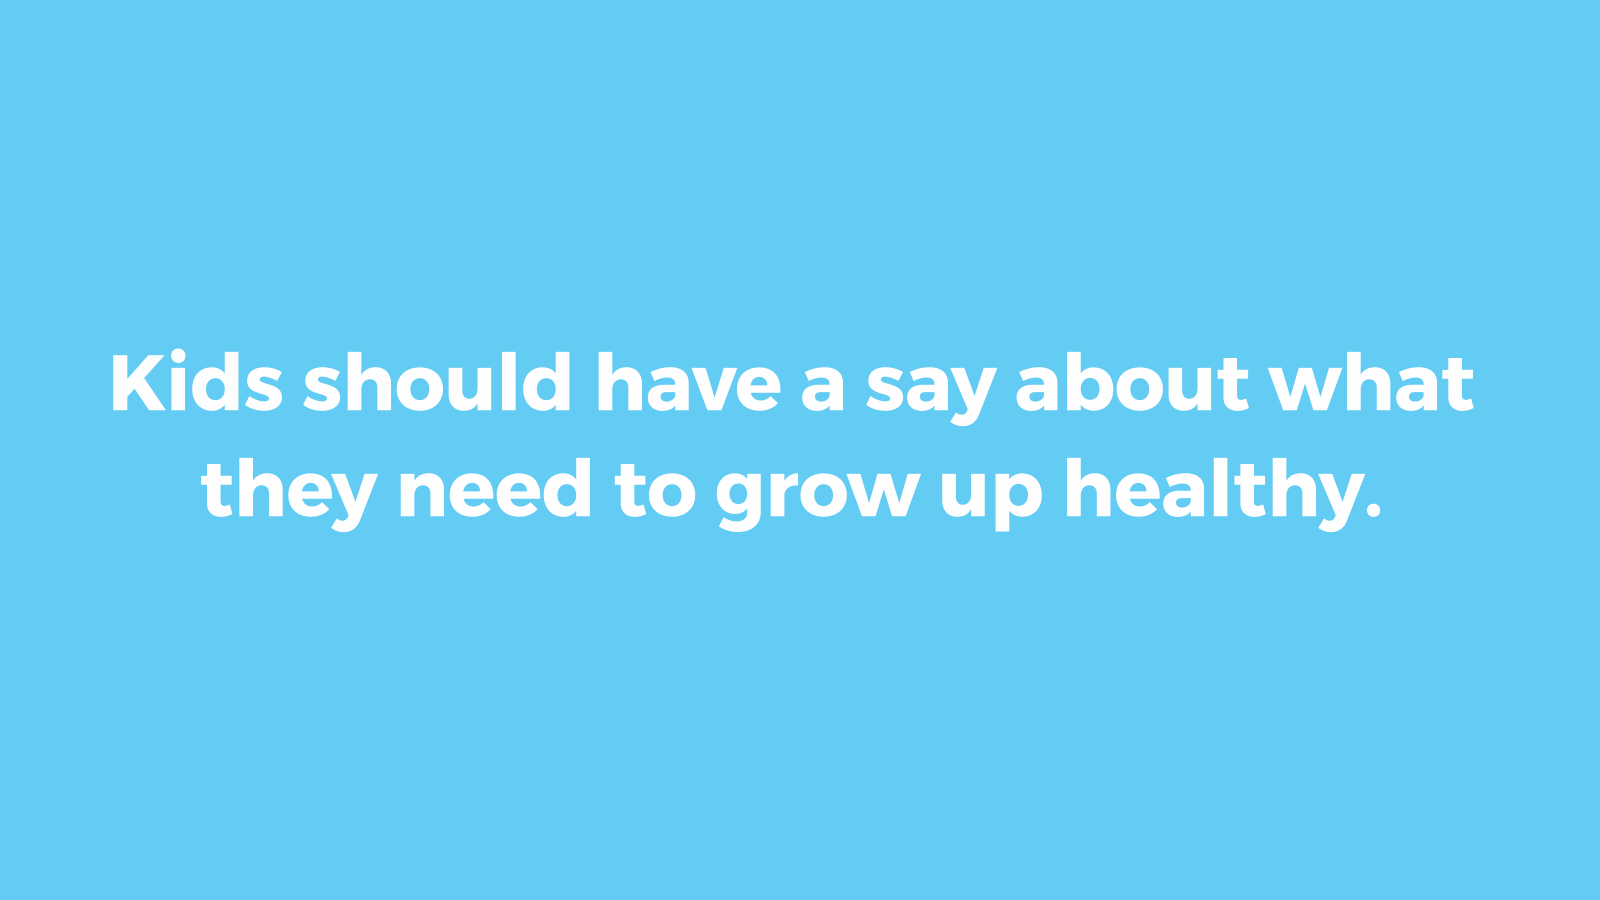 GIF showing text about the PARC stating that "Kids should have a say about how they grow up healthy."